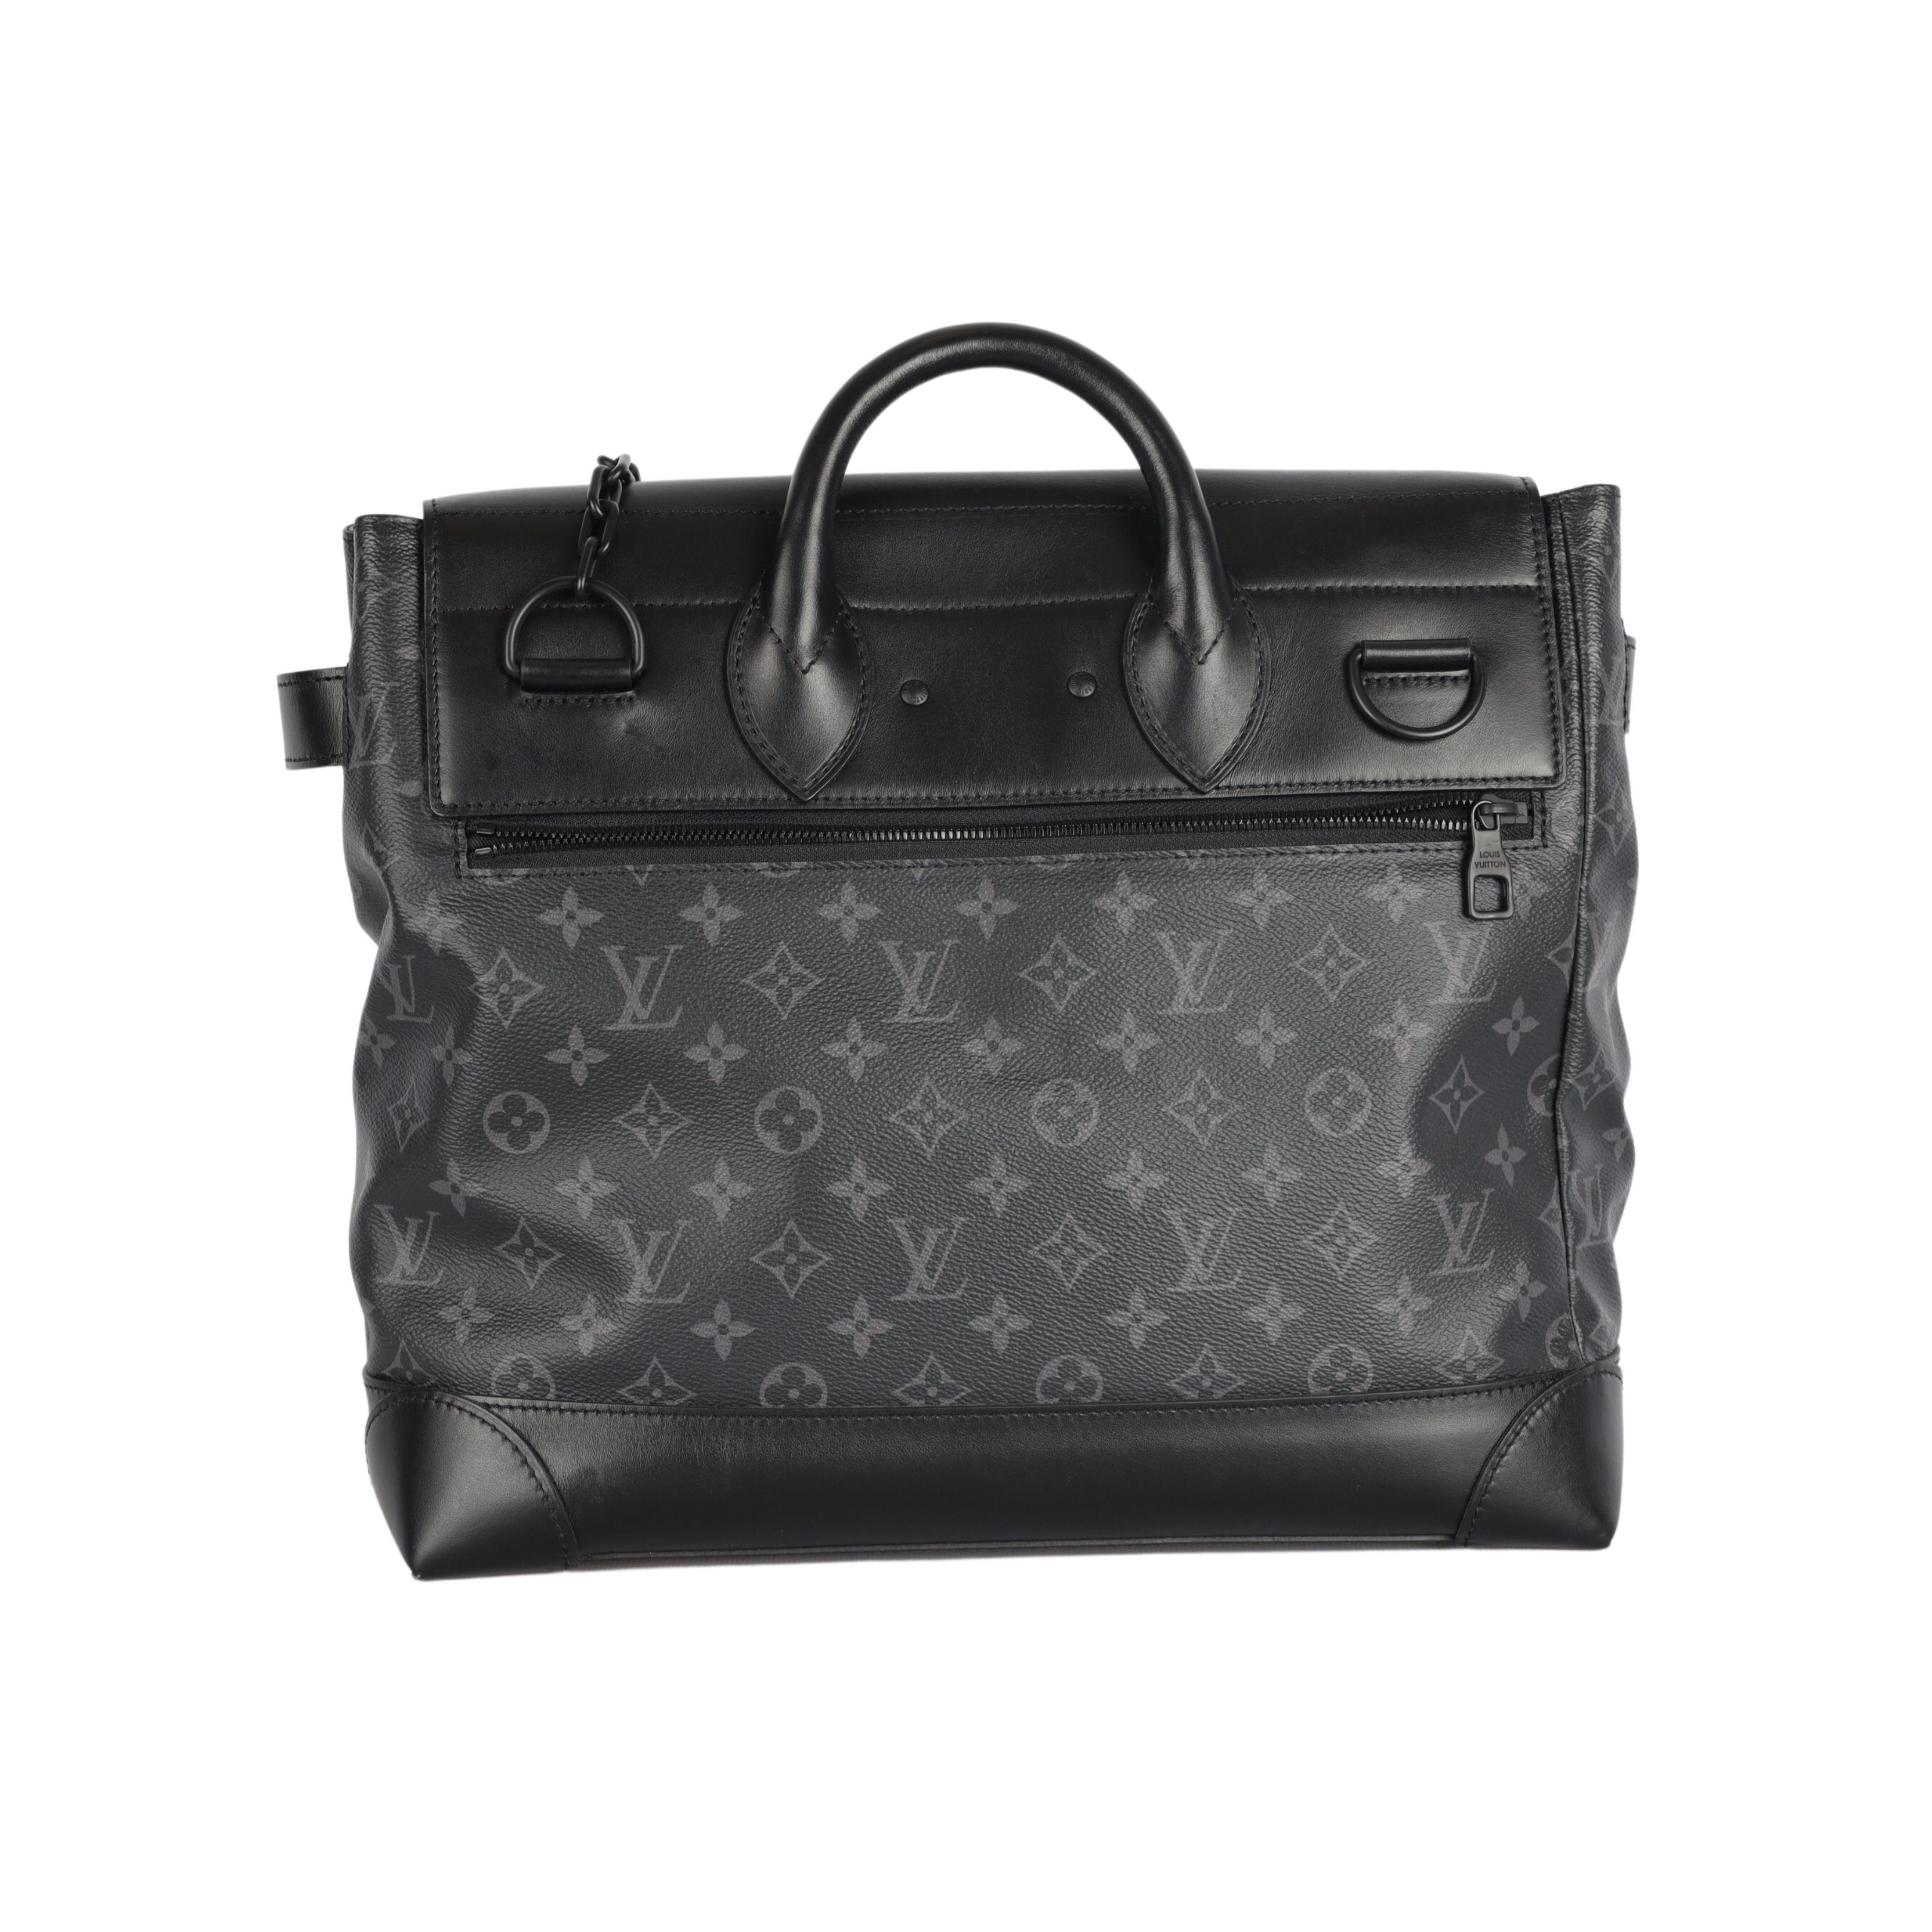  Louis Vuitton Monogram Eclipse Steamer In Excellent Condition For Sale In Milano, IT